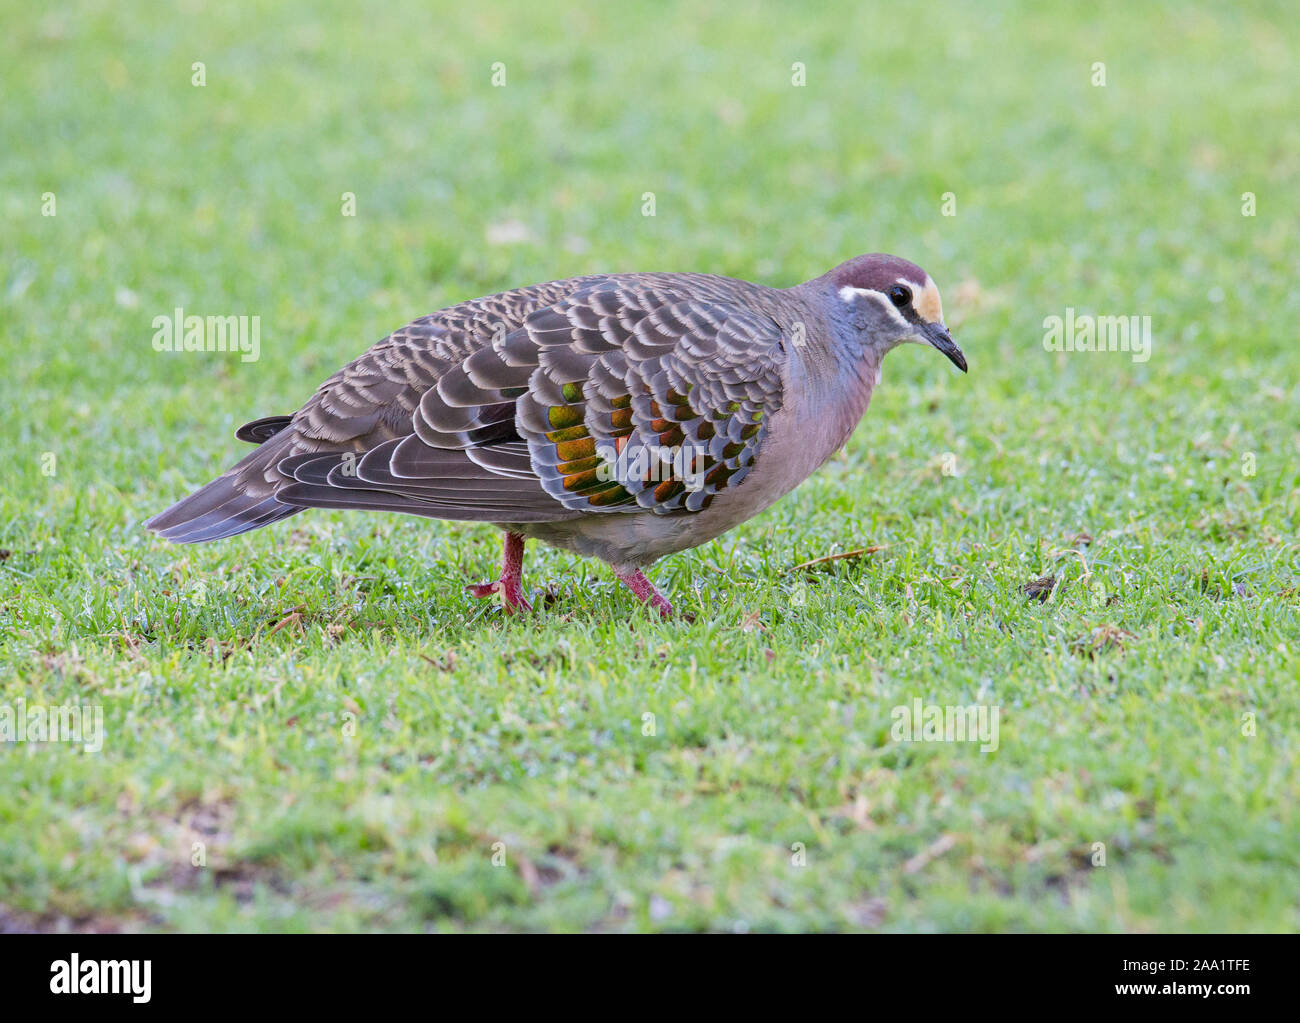 Common Bronzewing (Phaps chalcoptera) a type of native Australian pigeon with distinctive iridescent  wing feathers. Stock Photo